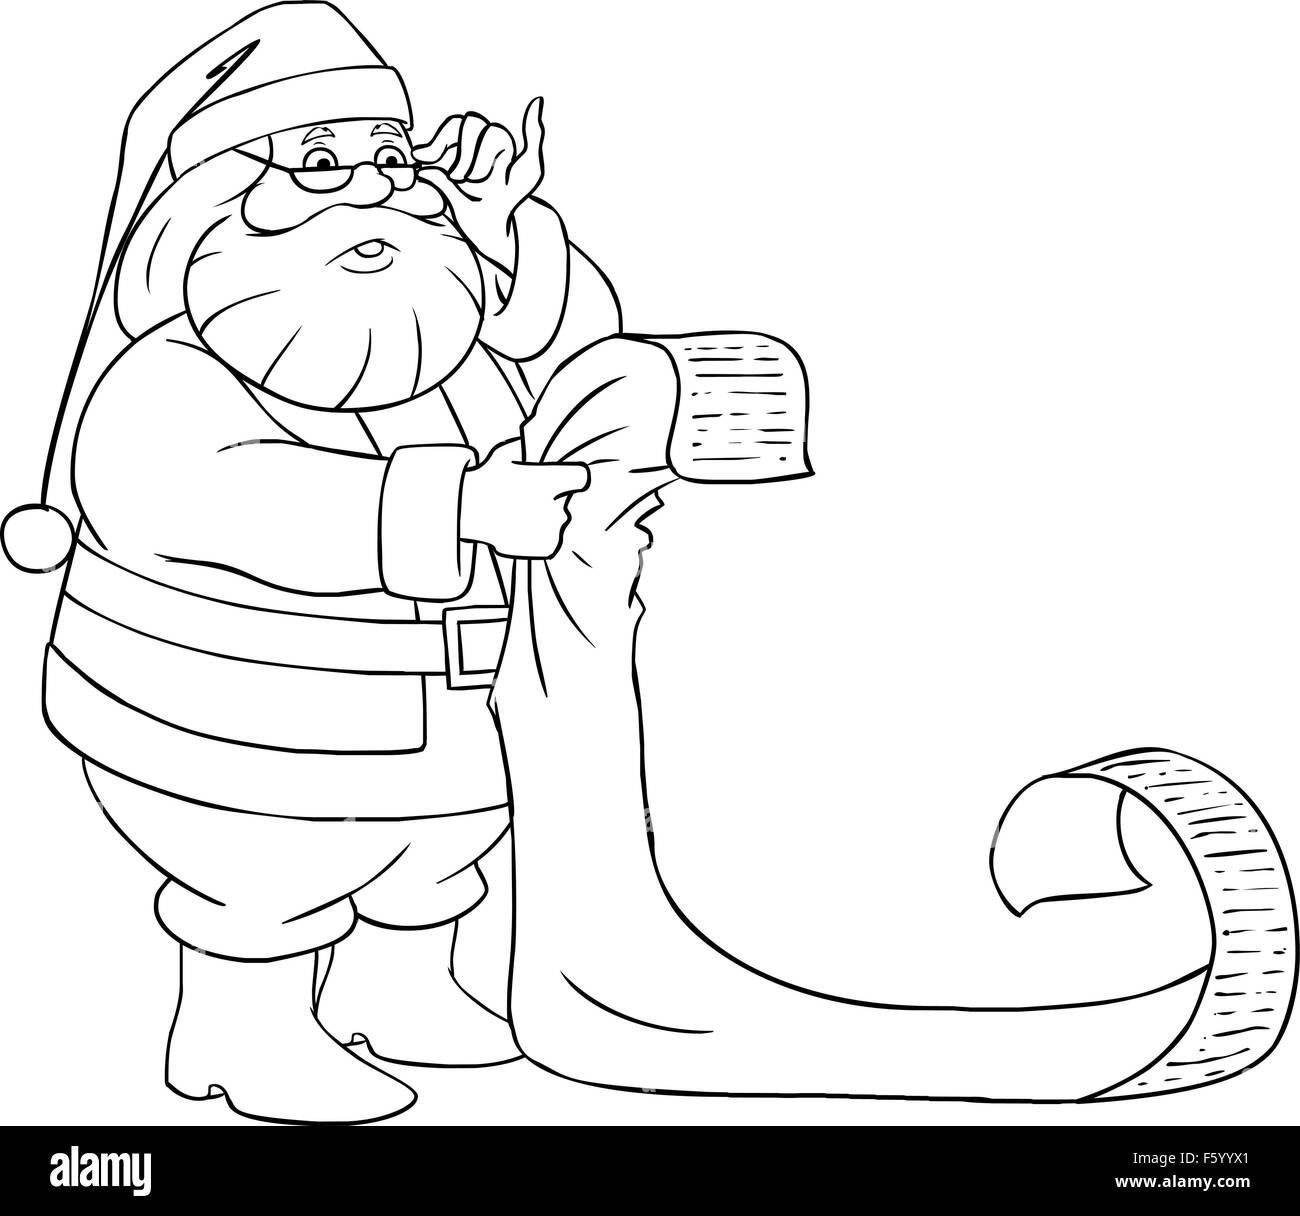 A vector illustration of Santa Claus holding and reading from his Christmas list of good and bad children. Stock Vector